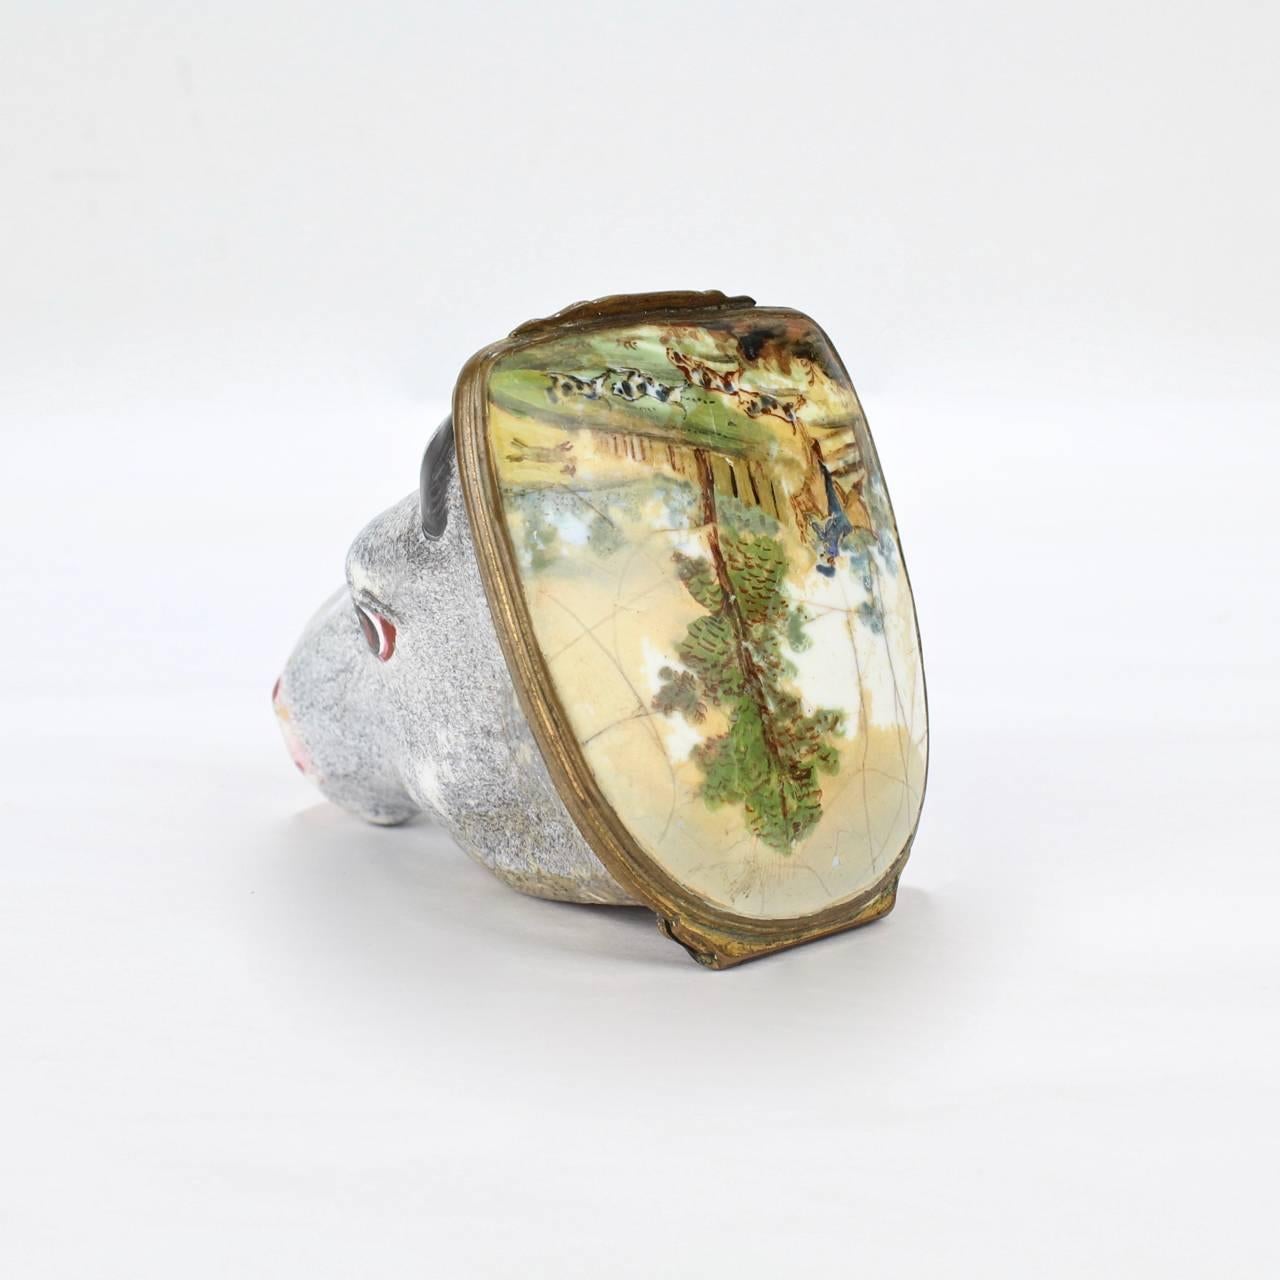 A fine and very rare, figural horse head Battersea or South Staffordshire enamel bonbonniere or large snuff box.

A gilt bronze mount connects the lid painted with a bucolic landscape scene.

Measure: Length ca. 3 3/8 inches.




 